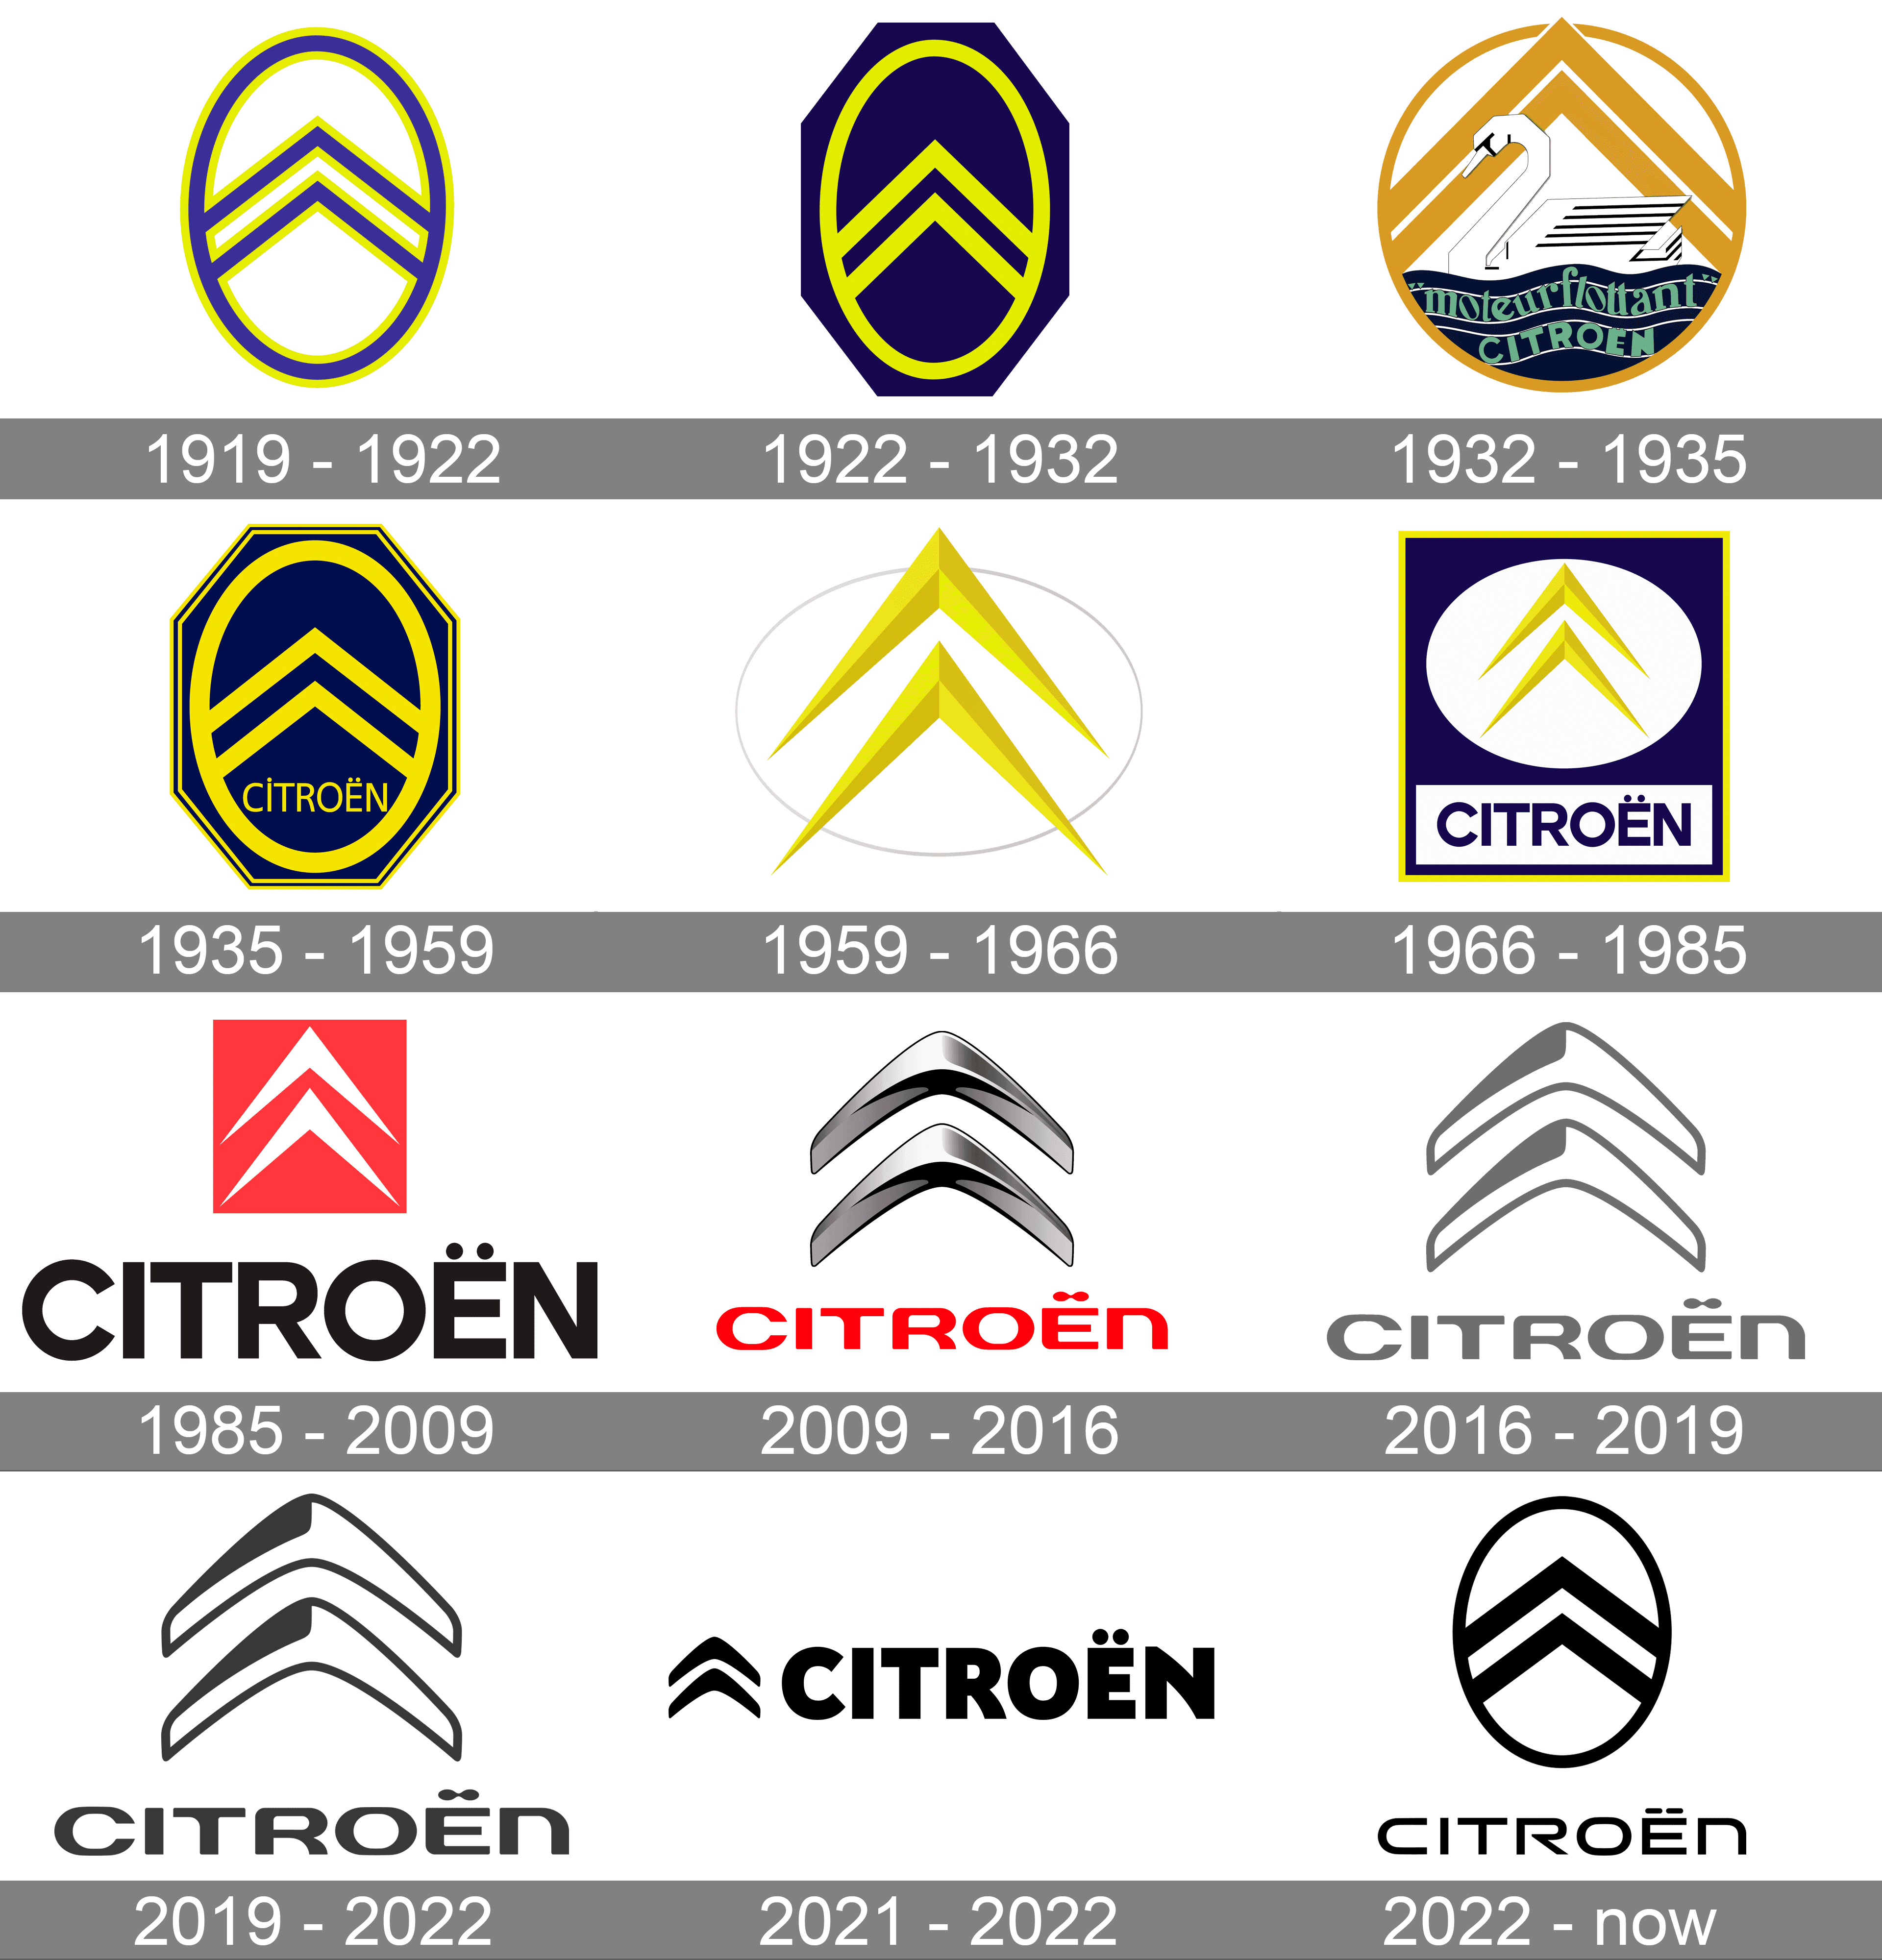 Citroën has updated its logo